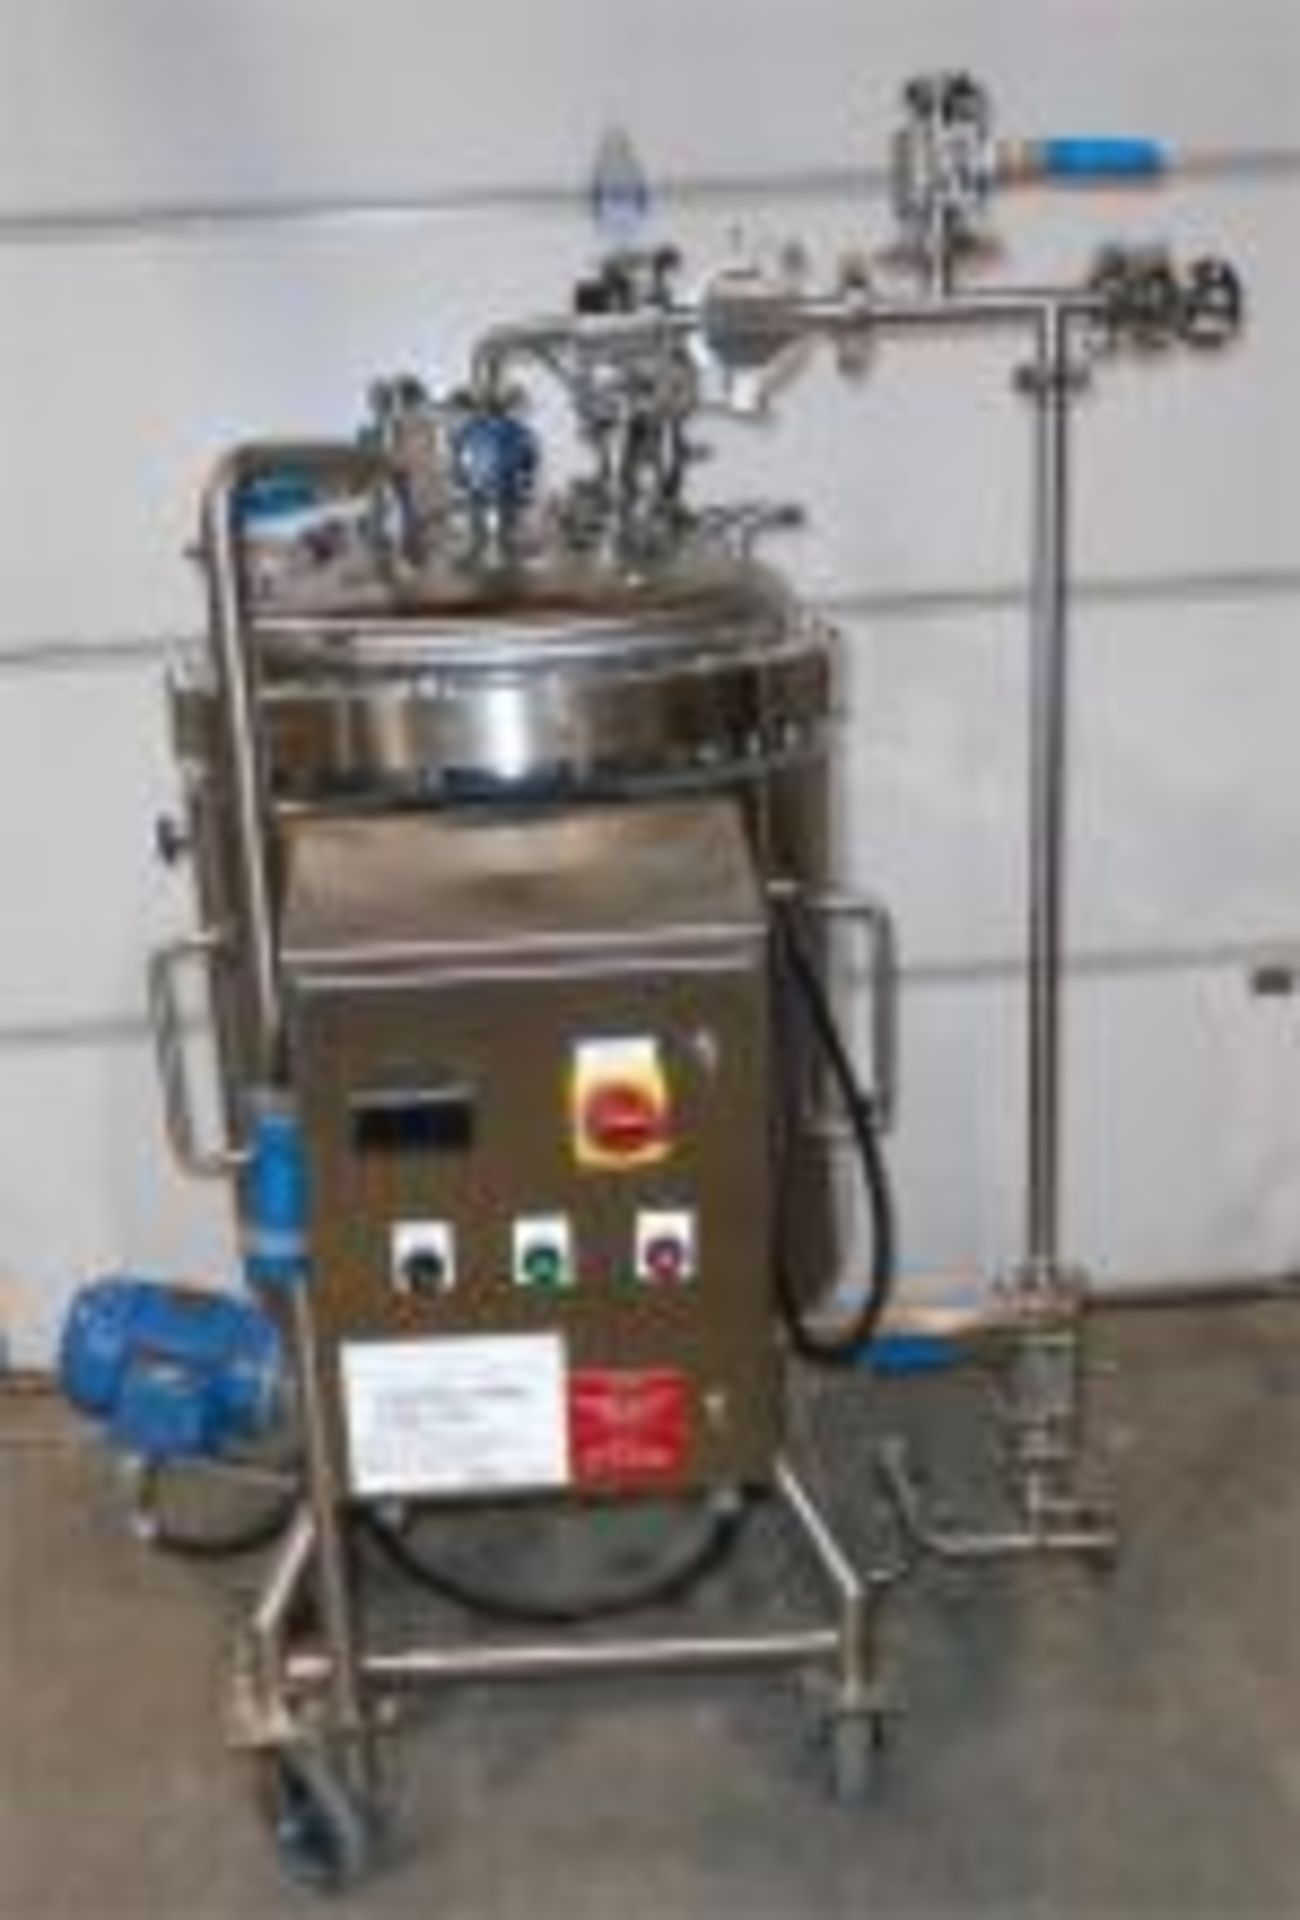 Highland 200 Litre Stainless Steel Steam Jacketed Processor with mixer. Serial #76768. CRN #